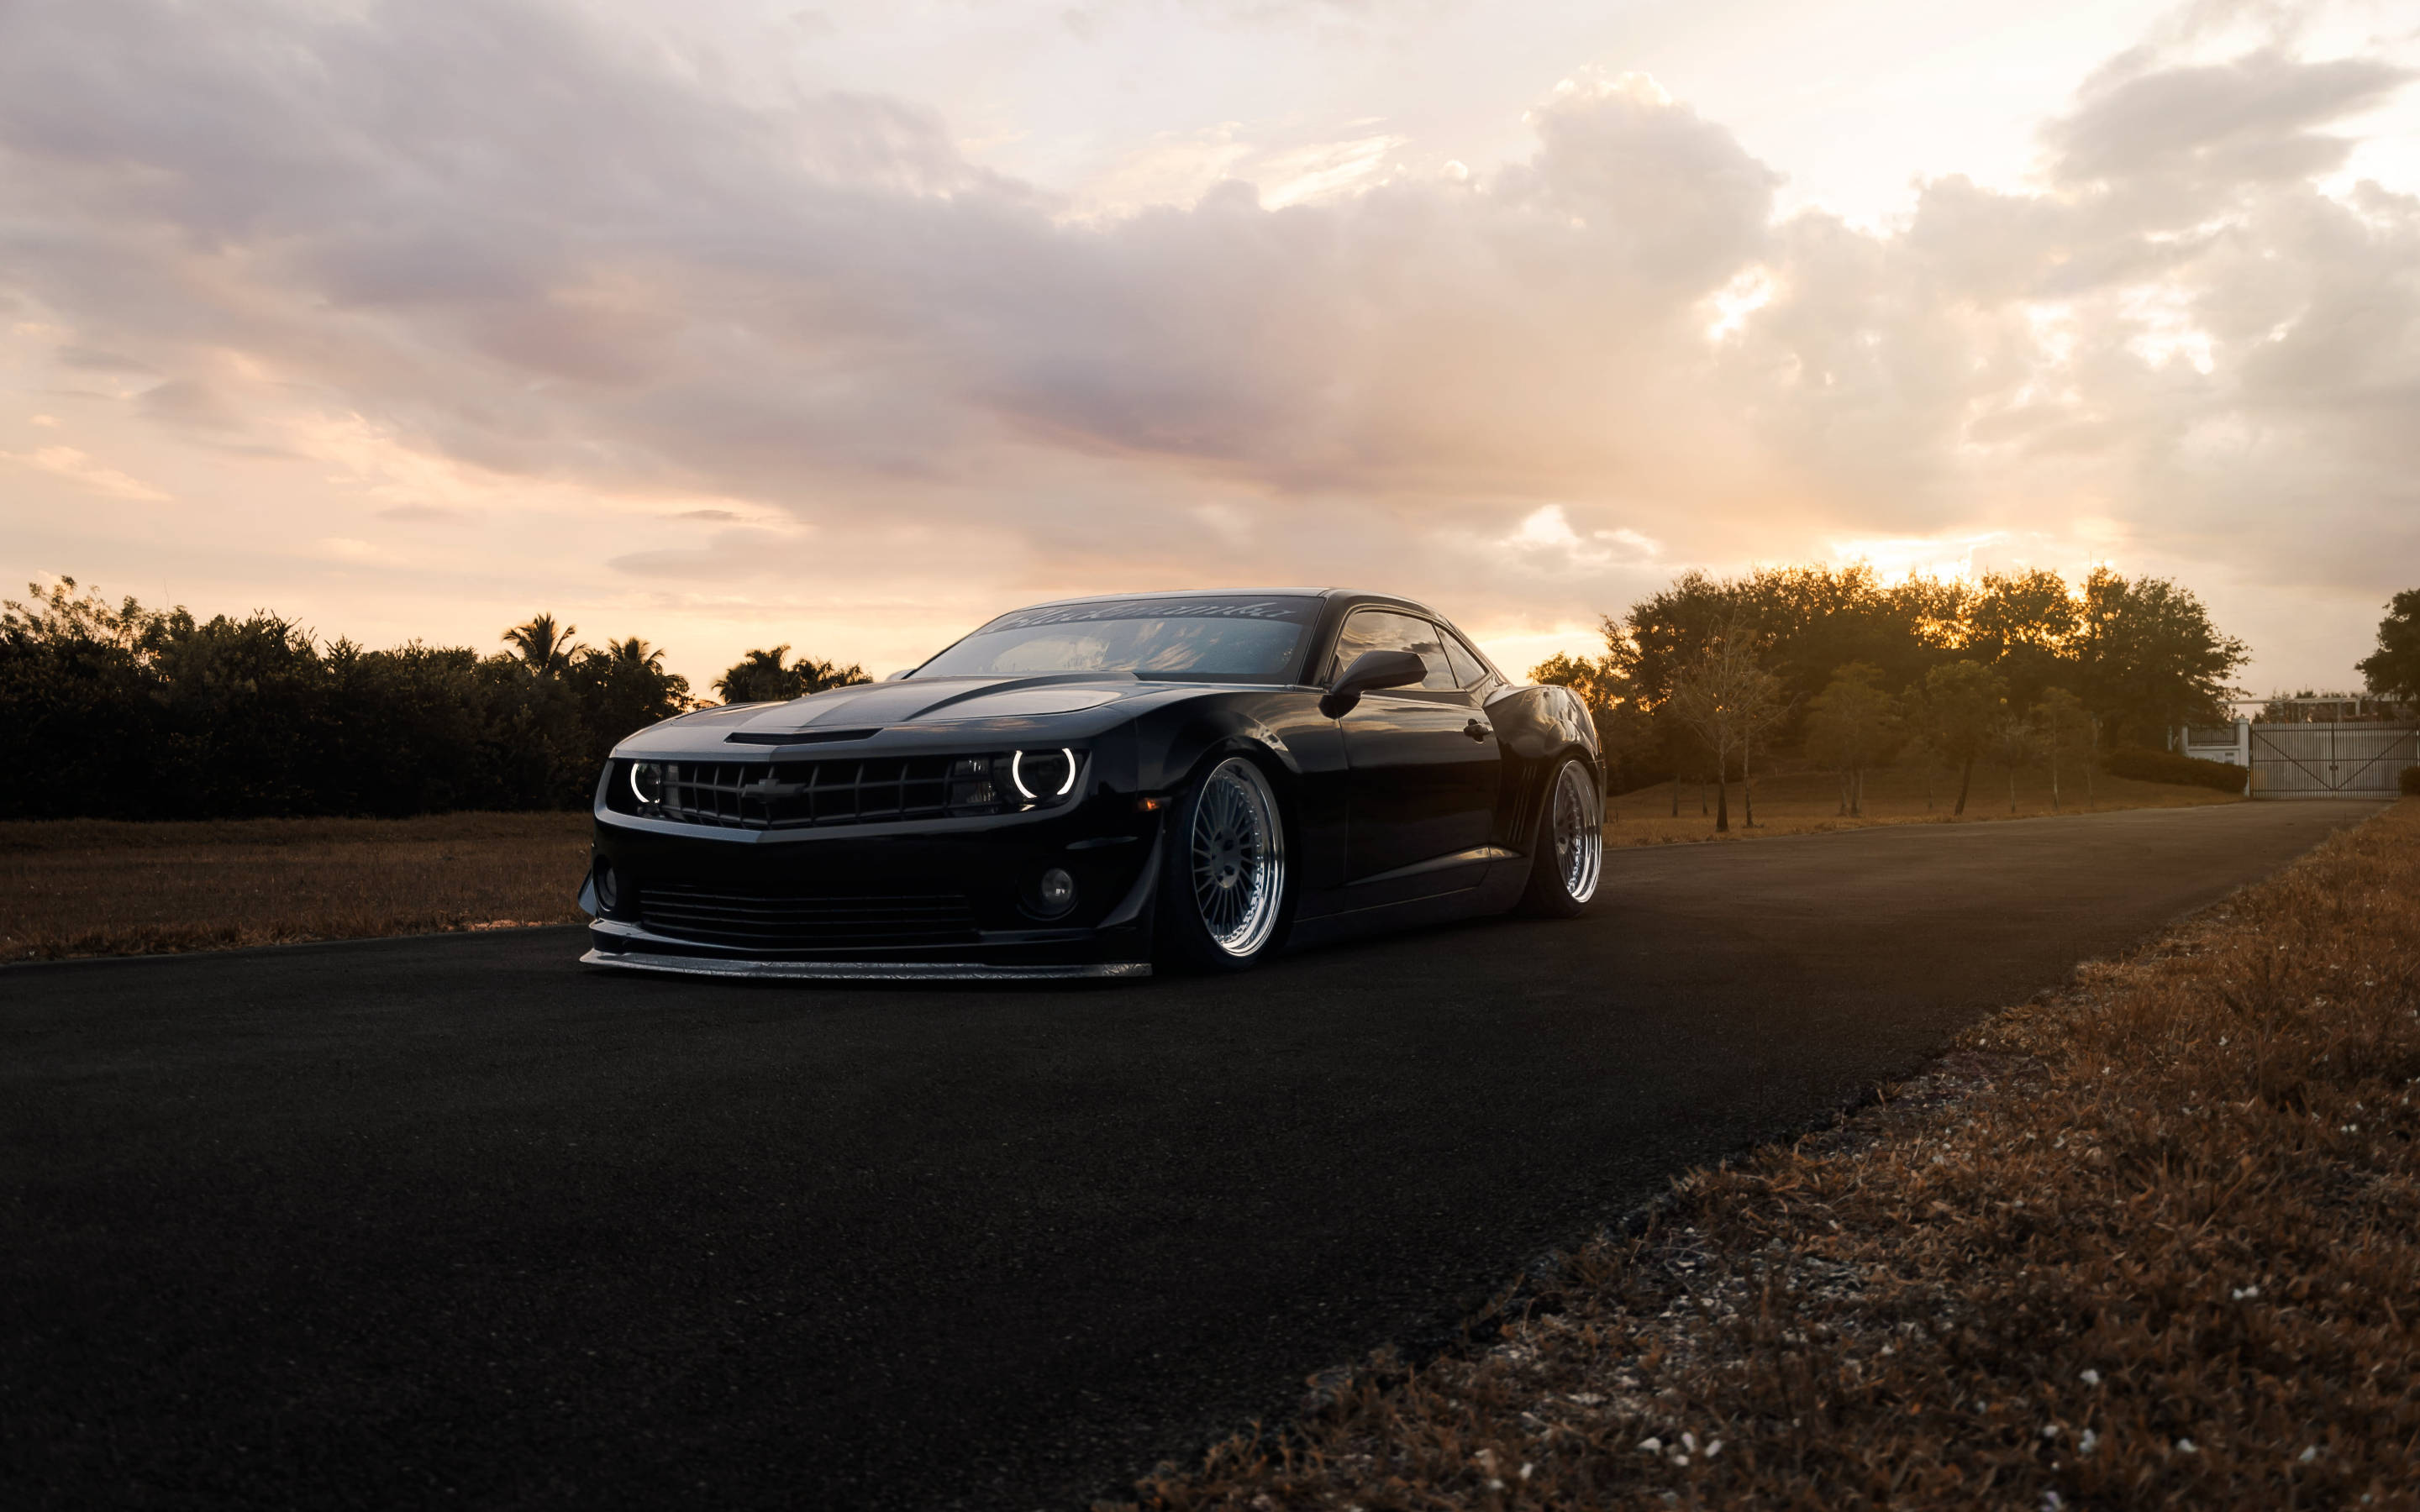 Majestic Black Camaro Muscle Car in High Definition Wallpaper